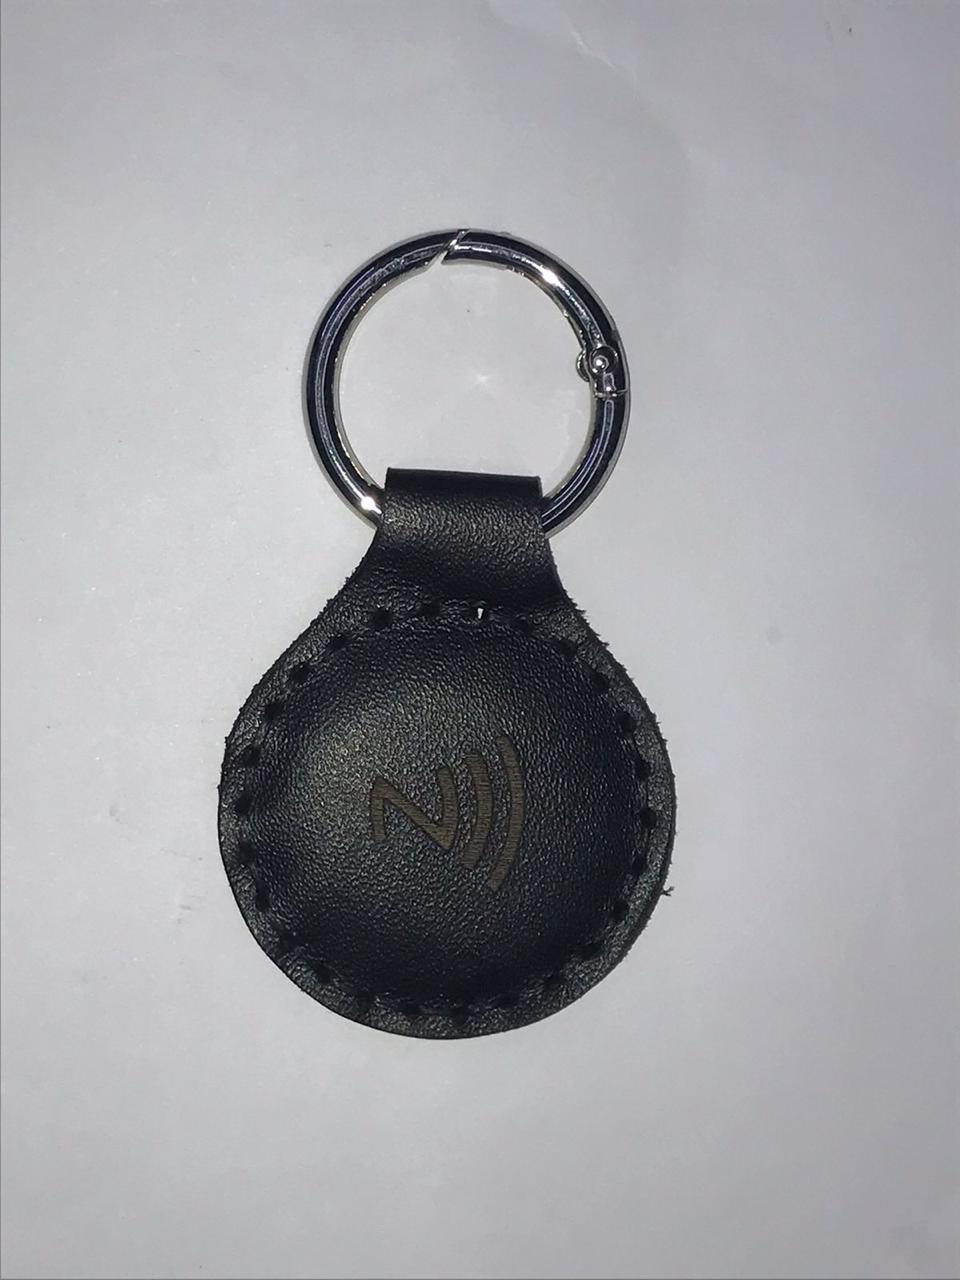 NFC Egypt Keychain - Share Everything Handmade Natural Leather (Black)